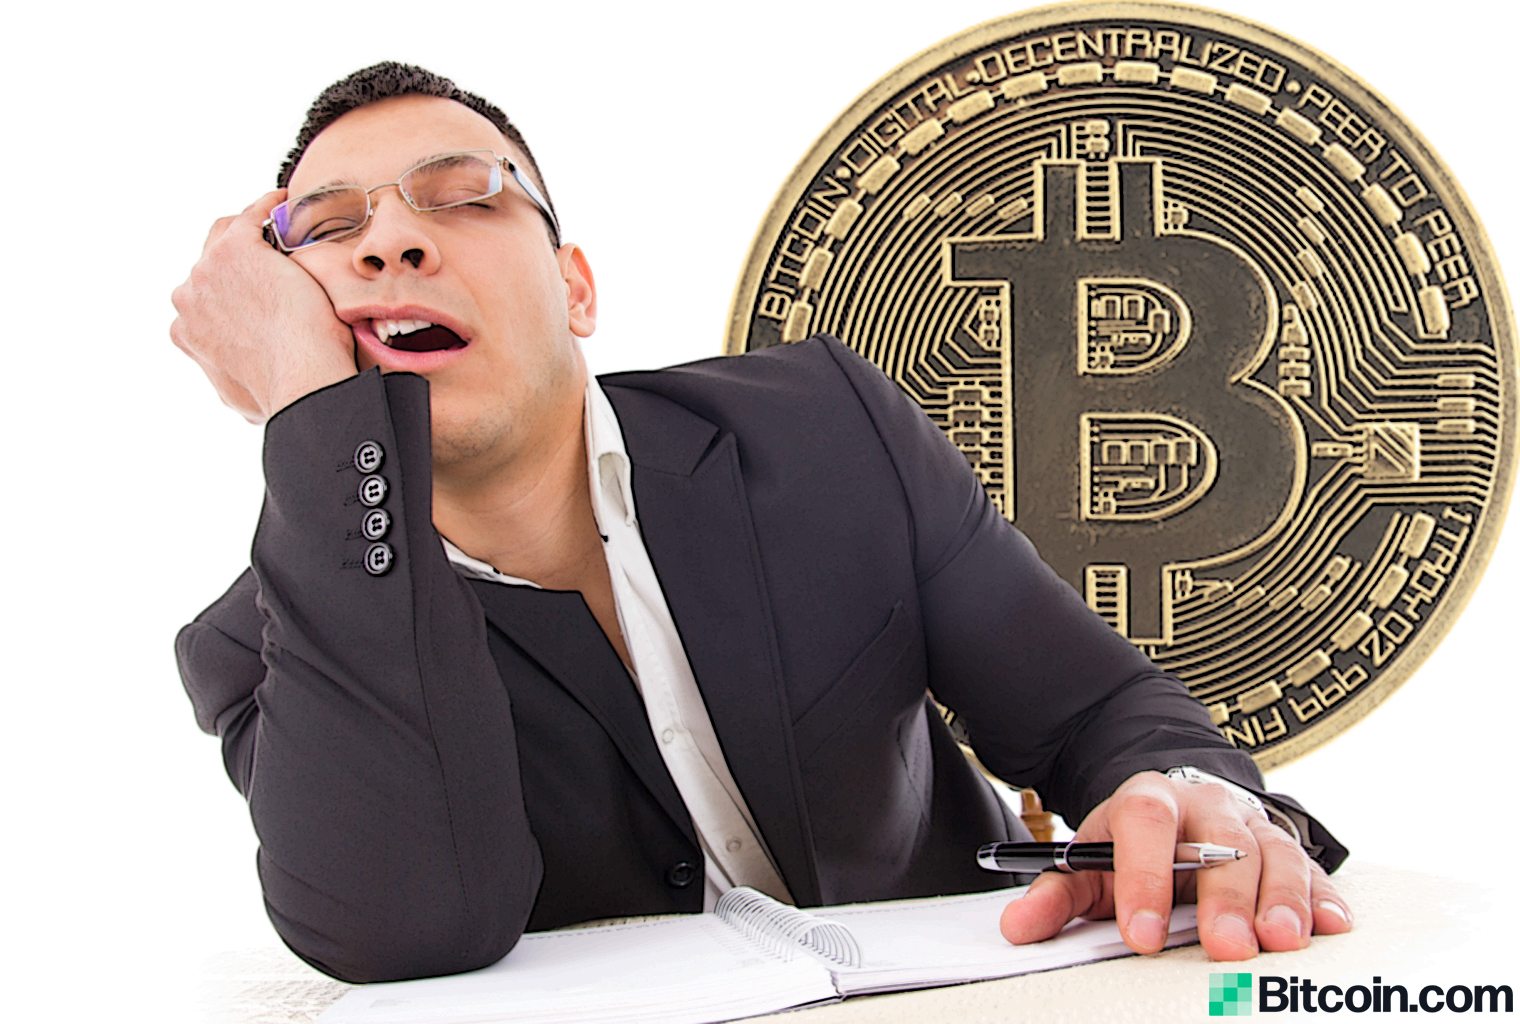 Data Shows Institutional Interest in Bitcoin Has Diminished